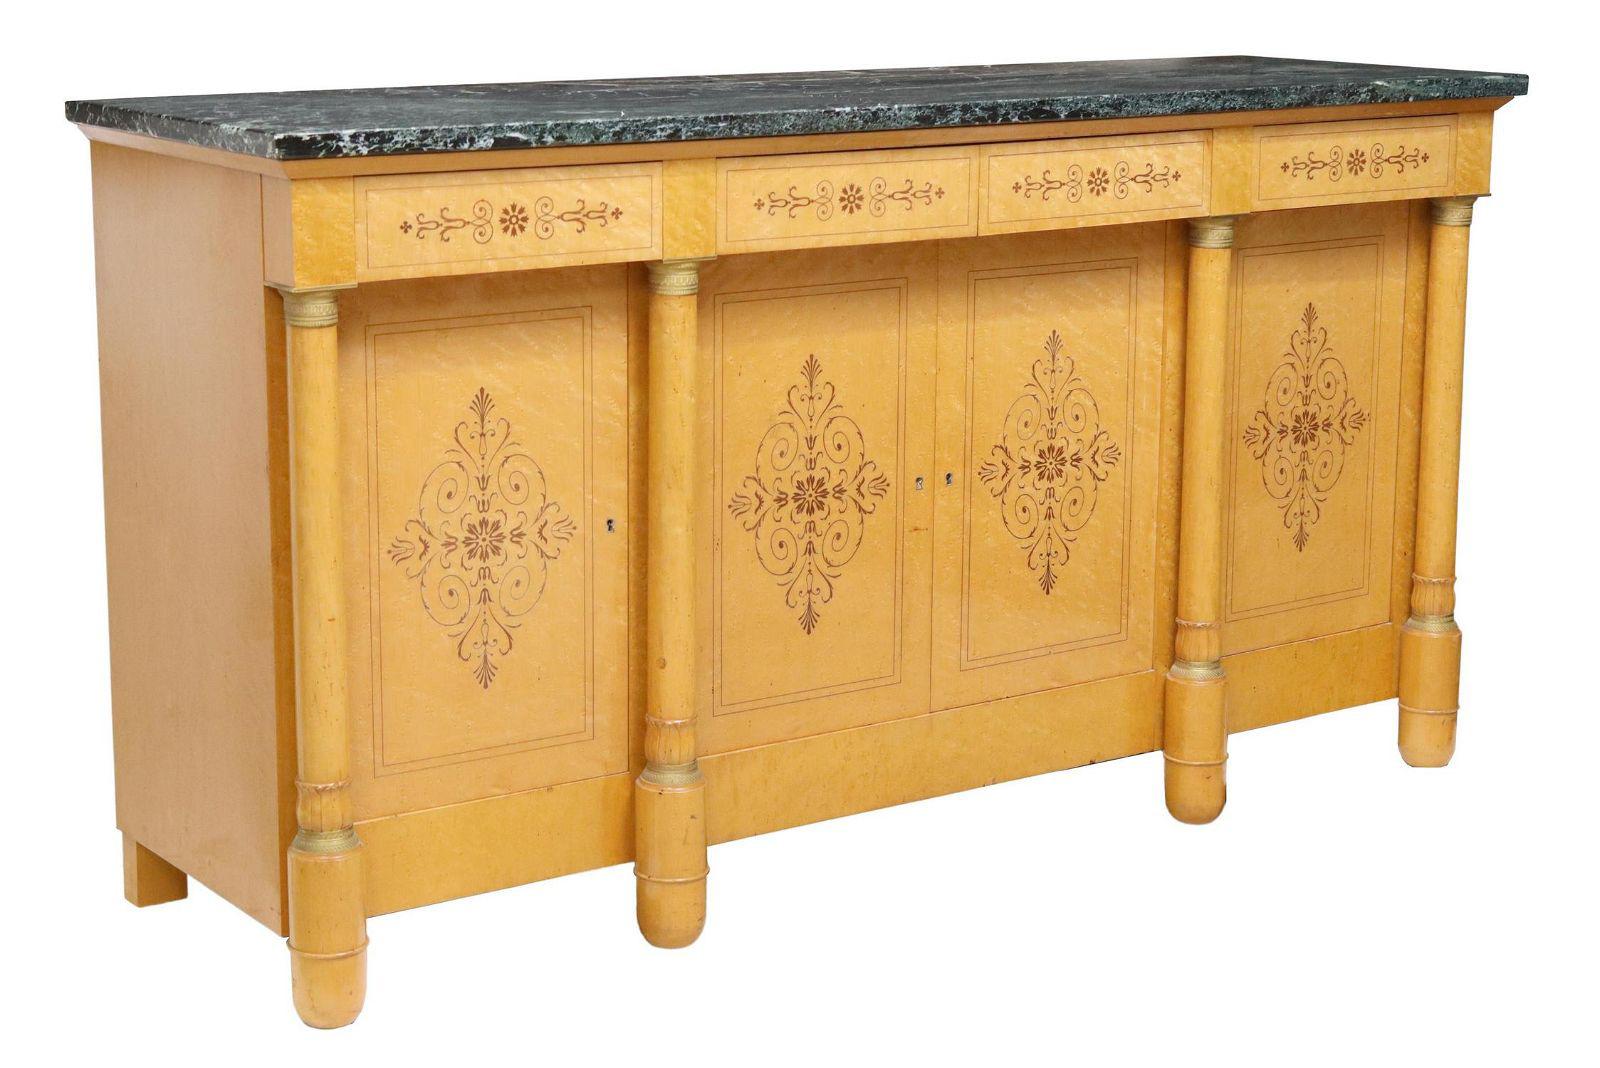 Vintage French Empire style marble-top sideboard, late 20th c. Sideboard features a birdseye maple case (reminiscent and very similar to Burlwood) with contrasting marquetry inlay, four drawers, over four cabinet doors, interior shelf, framed by